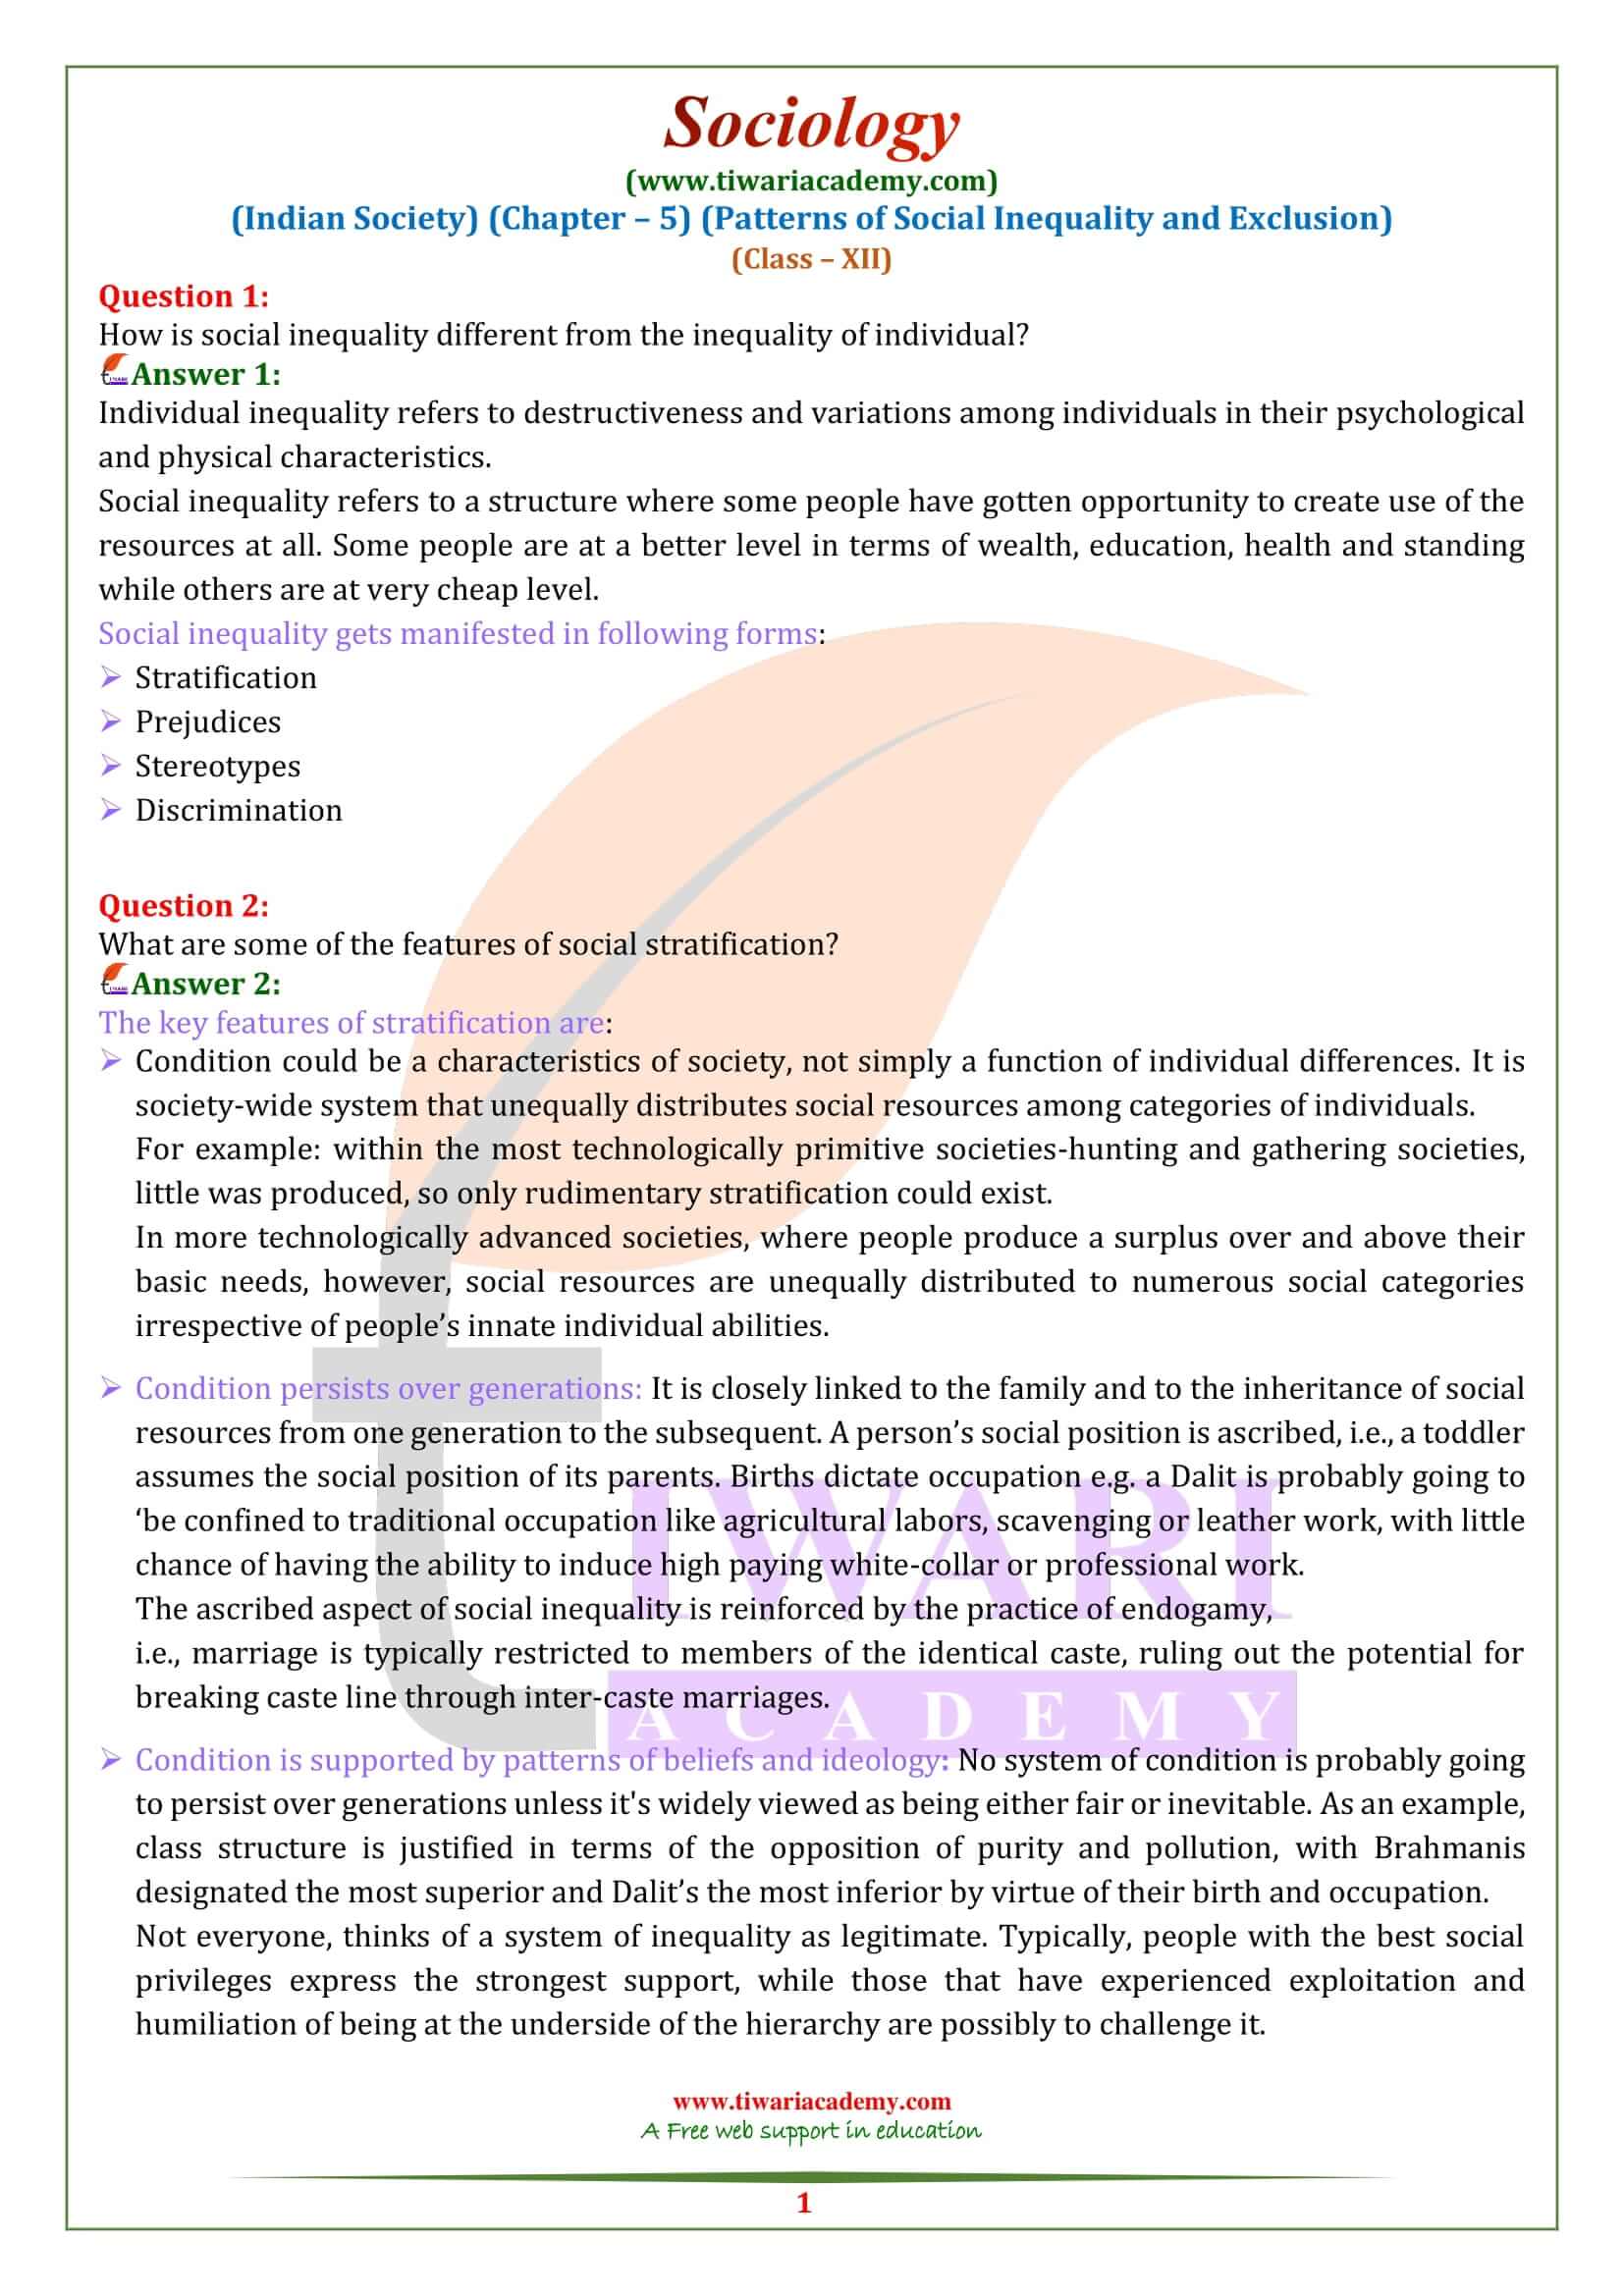 NCERT Solutions for Class 12 Sociology Chapter 5